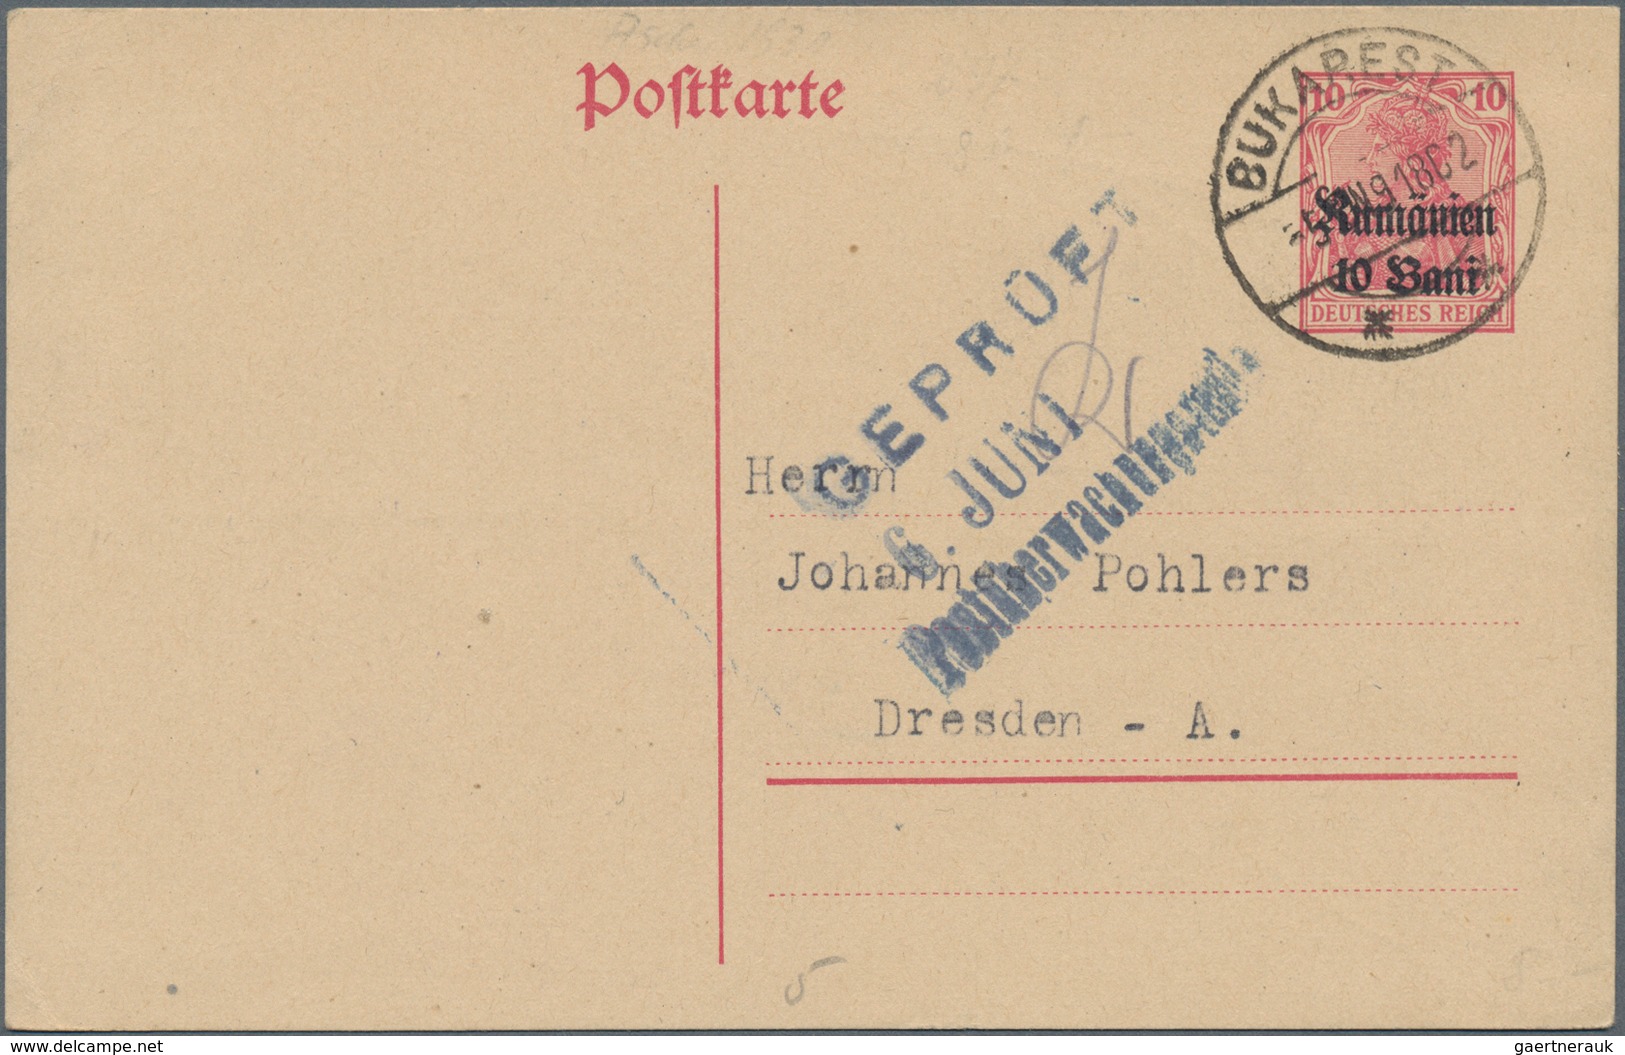 Rumänien: 1877/1950 (ca.), mostly used stationery inc. uprates (ca. 42) or covers (18); german occup